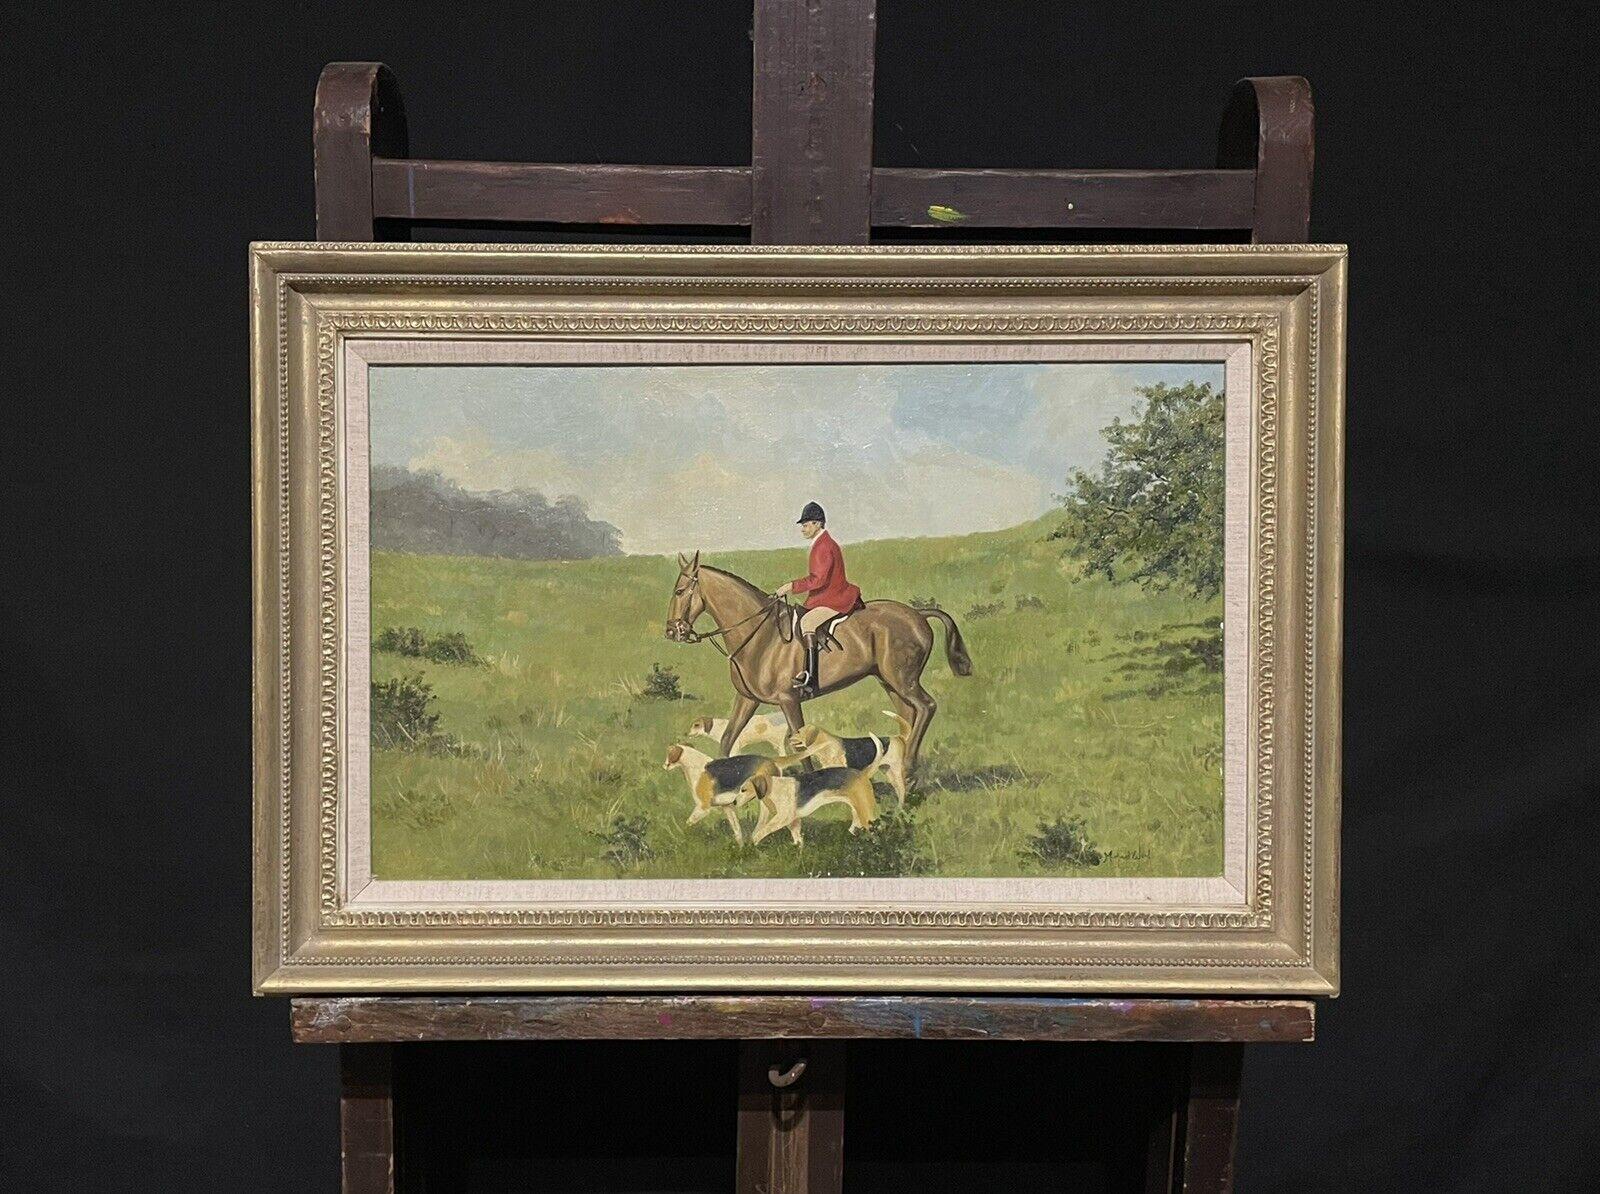 Artist/ School: British School, mid 20th century, signed lower corner

Title: Huntsman on horseback with hounds. 

Medium: oil painting on canvas, framed.

Size:

framed:   18  x  26 inches
canvas:   13 x 21  inches

Provenance: private collection,